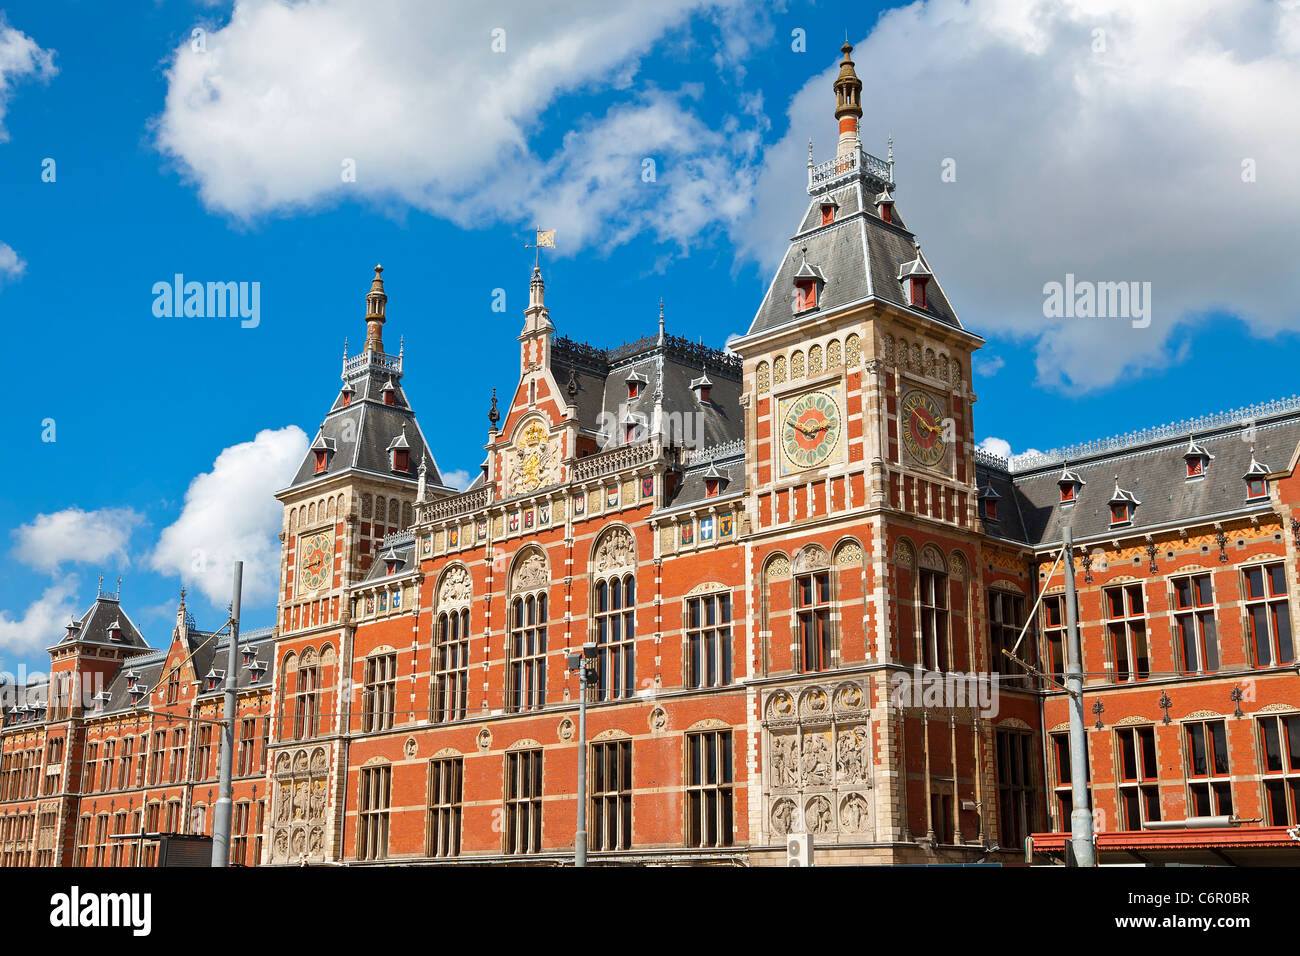 L'Europe, Pays-Bas, Amsterdam, Centraal Station Banque D'Images